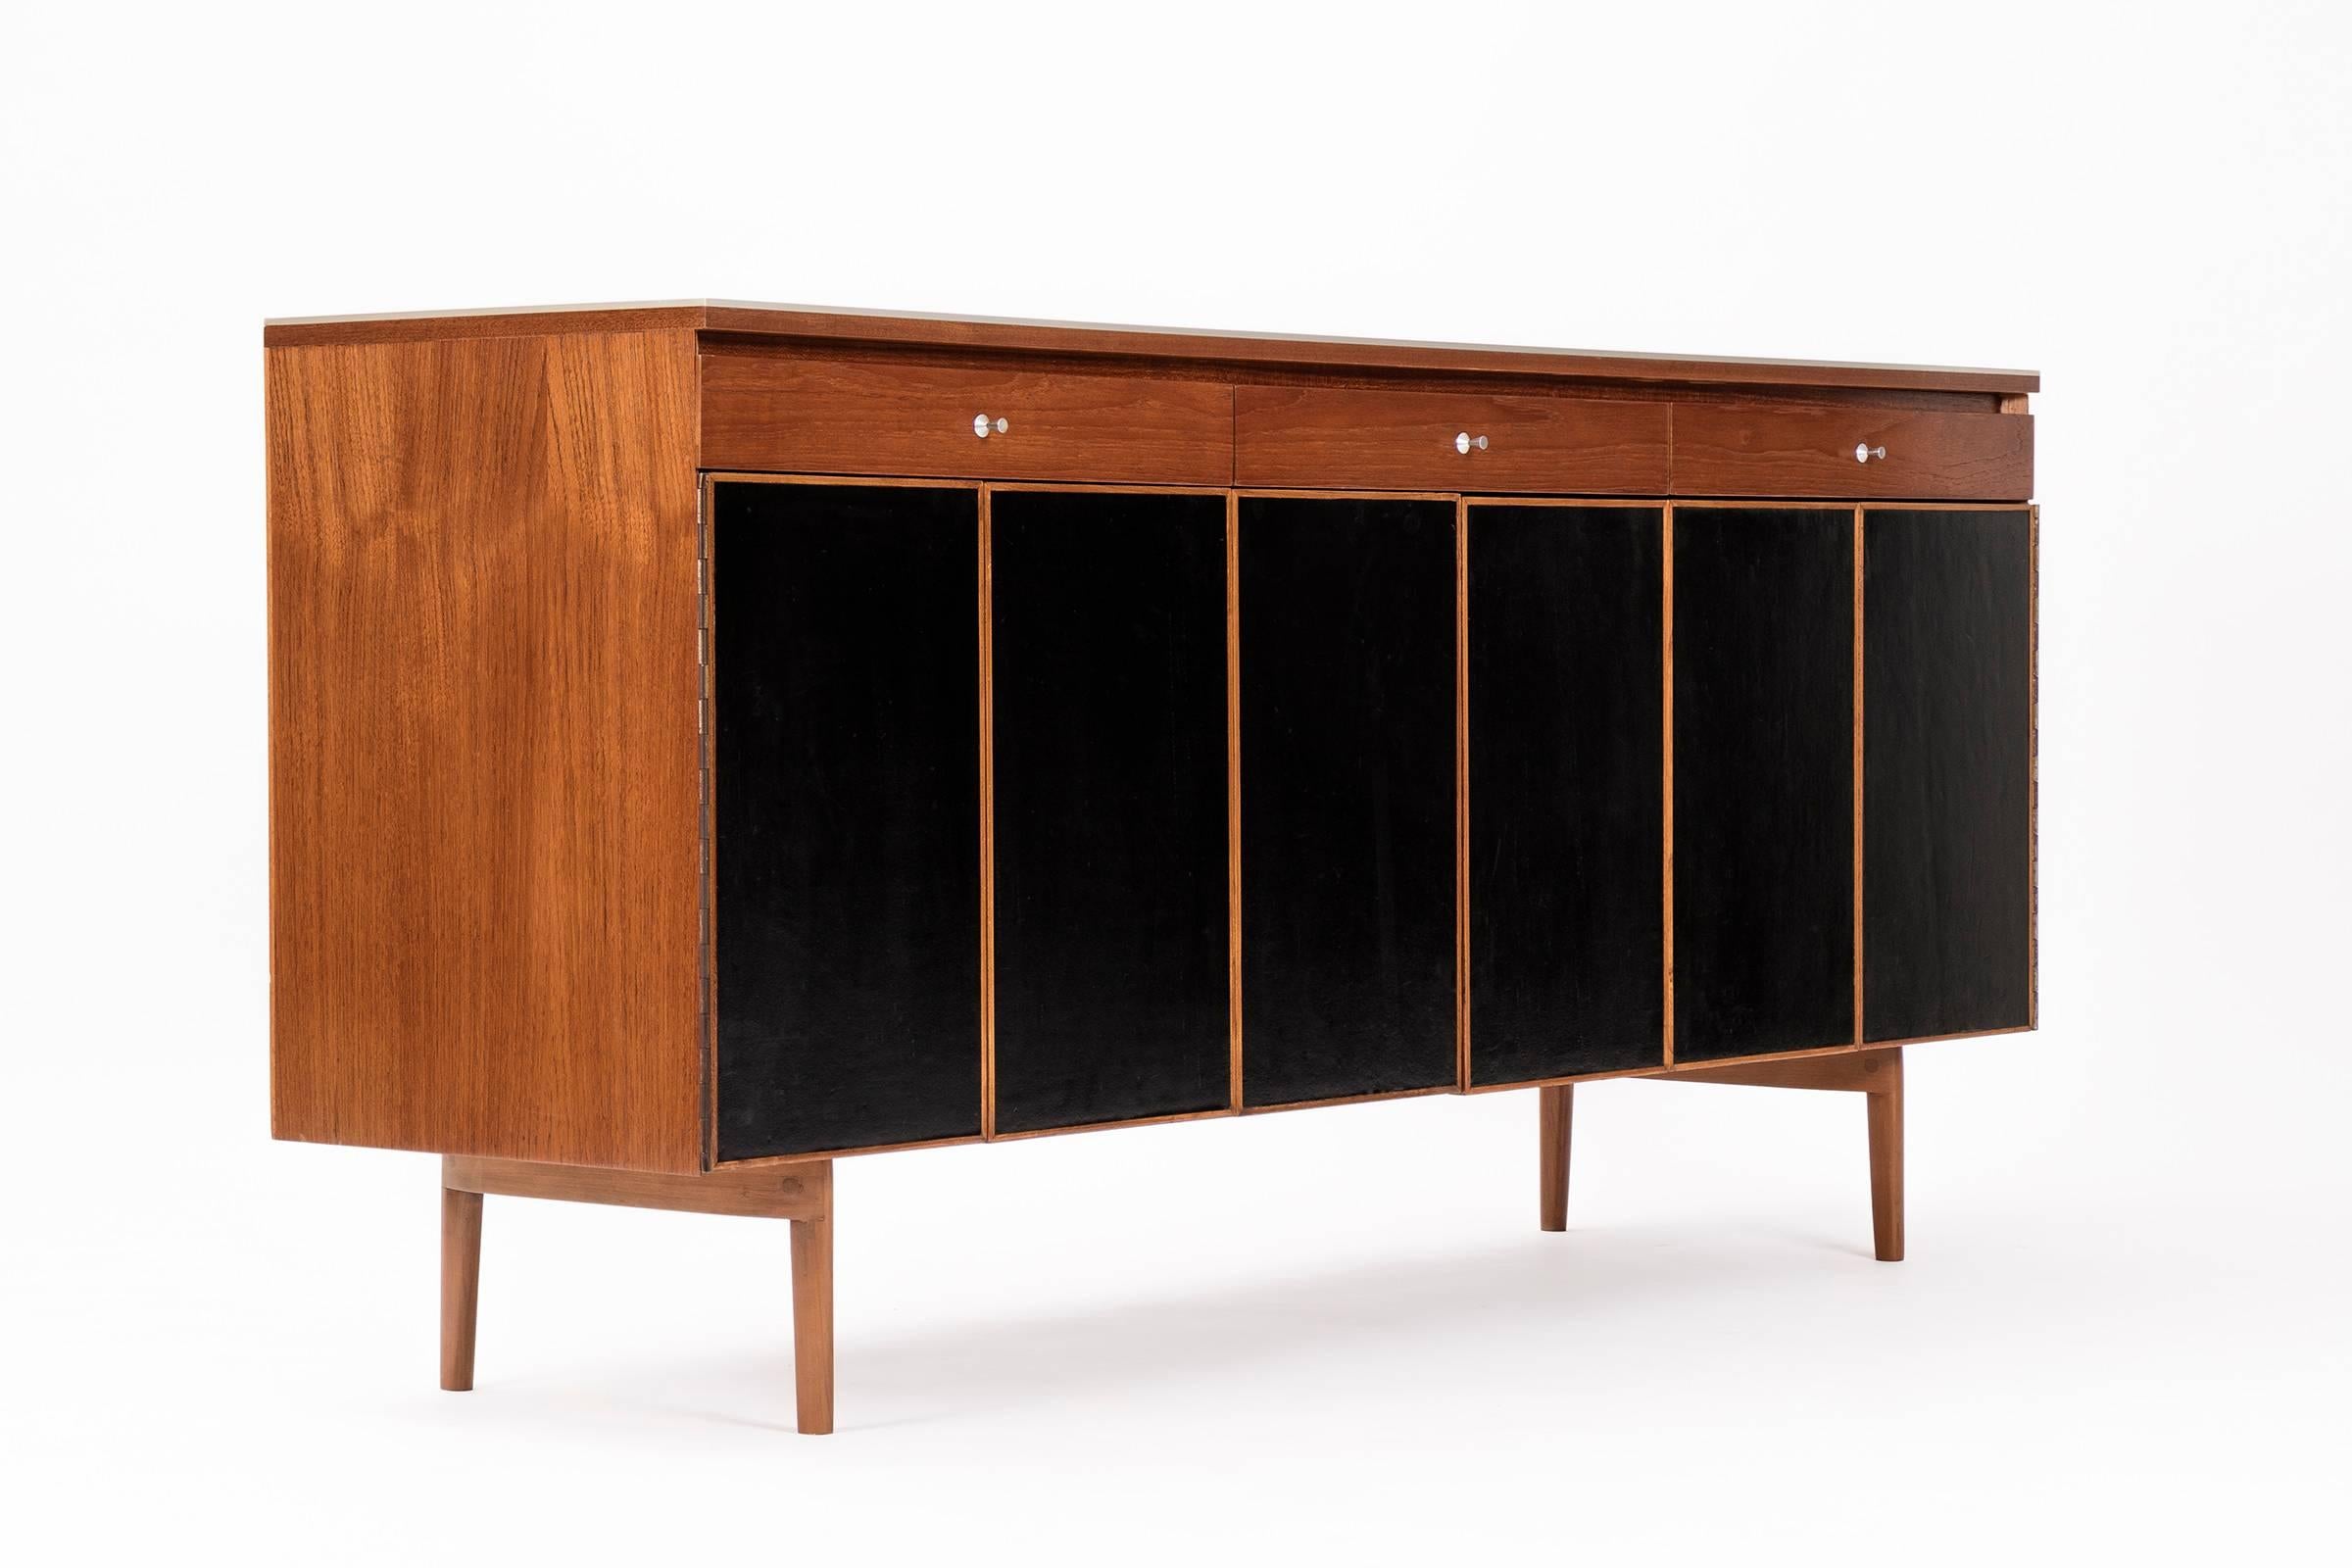 Paul McCobb sideboard features three drawers across the top with aluminium pulls. Piano hinged panels with leather covered fronts conceal six drawers with cut-out tops for pulls.
Walnut interior and exterior have hand rubbed oil finish with solid